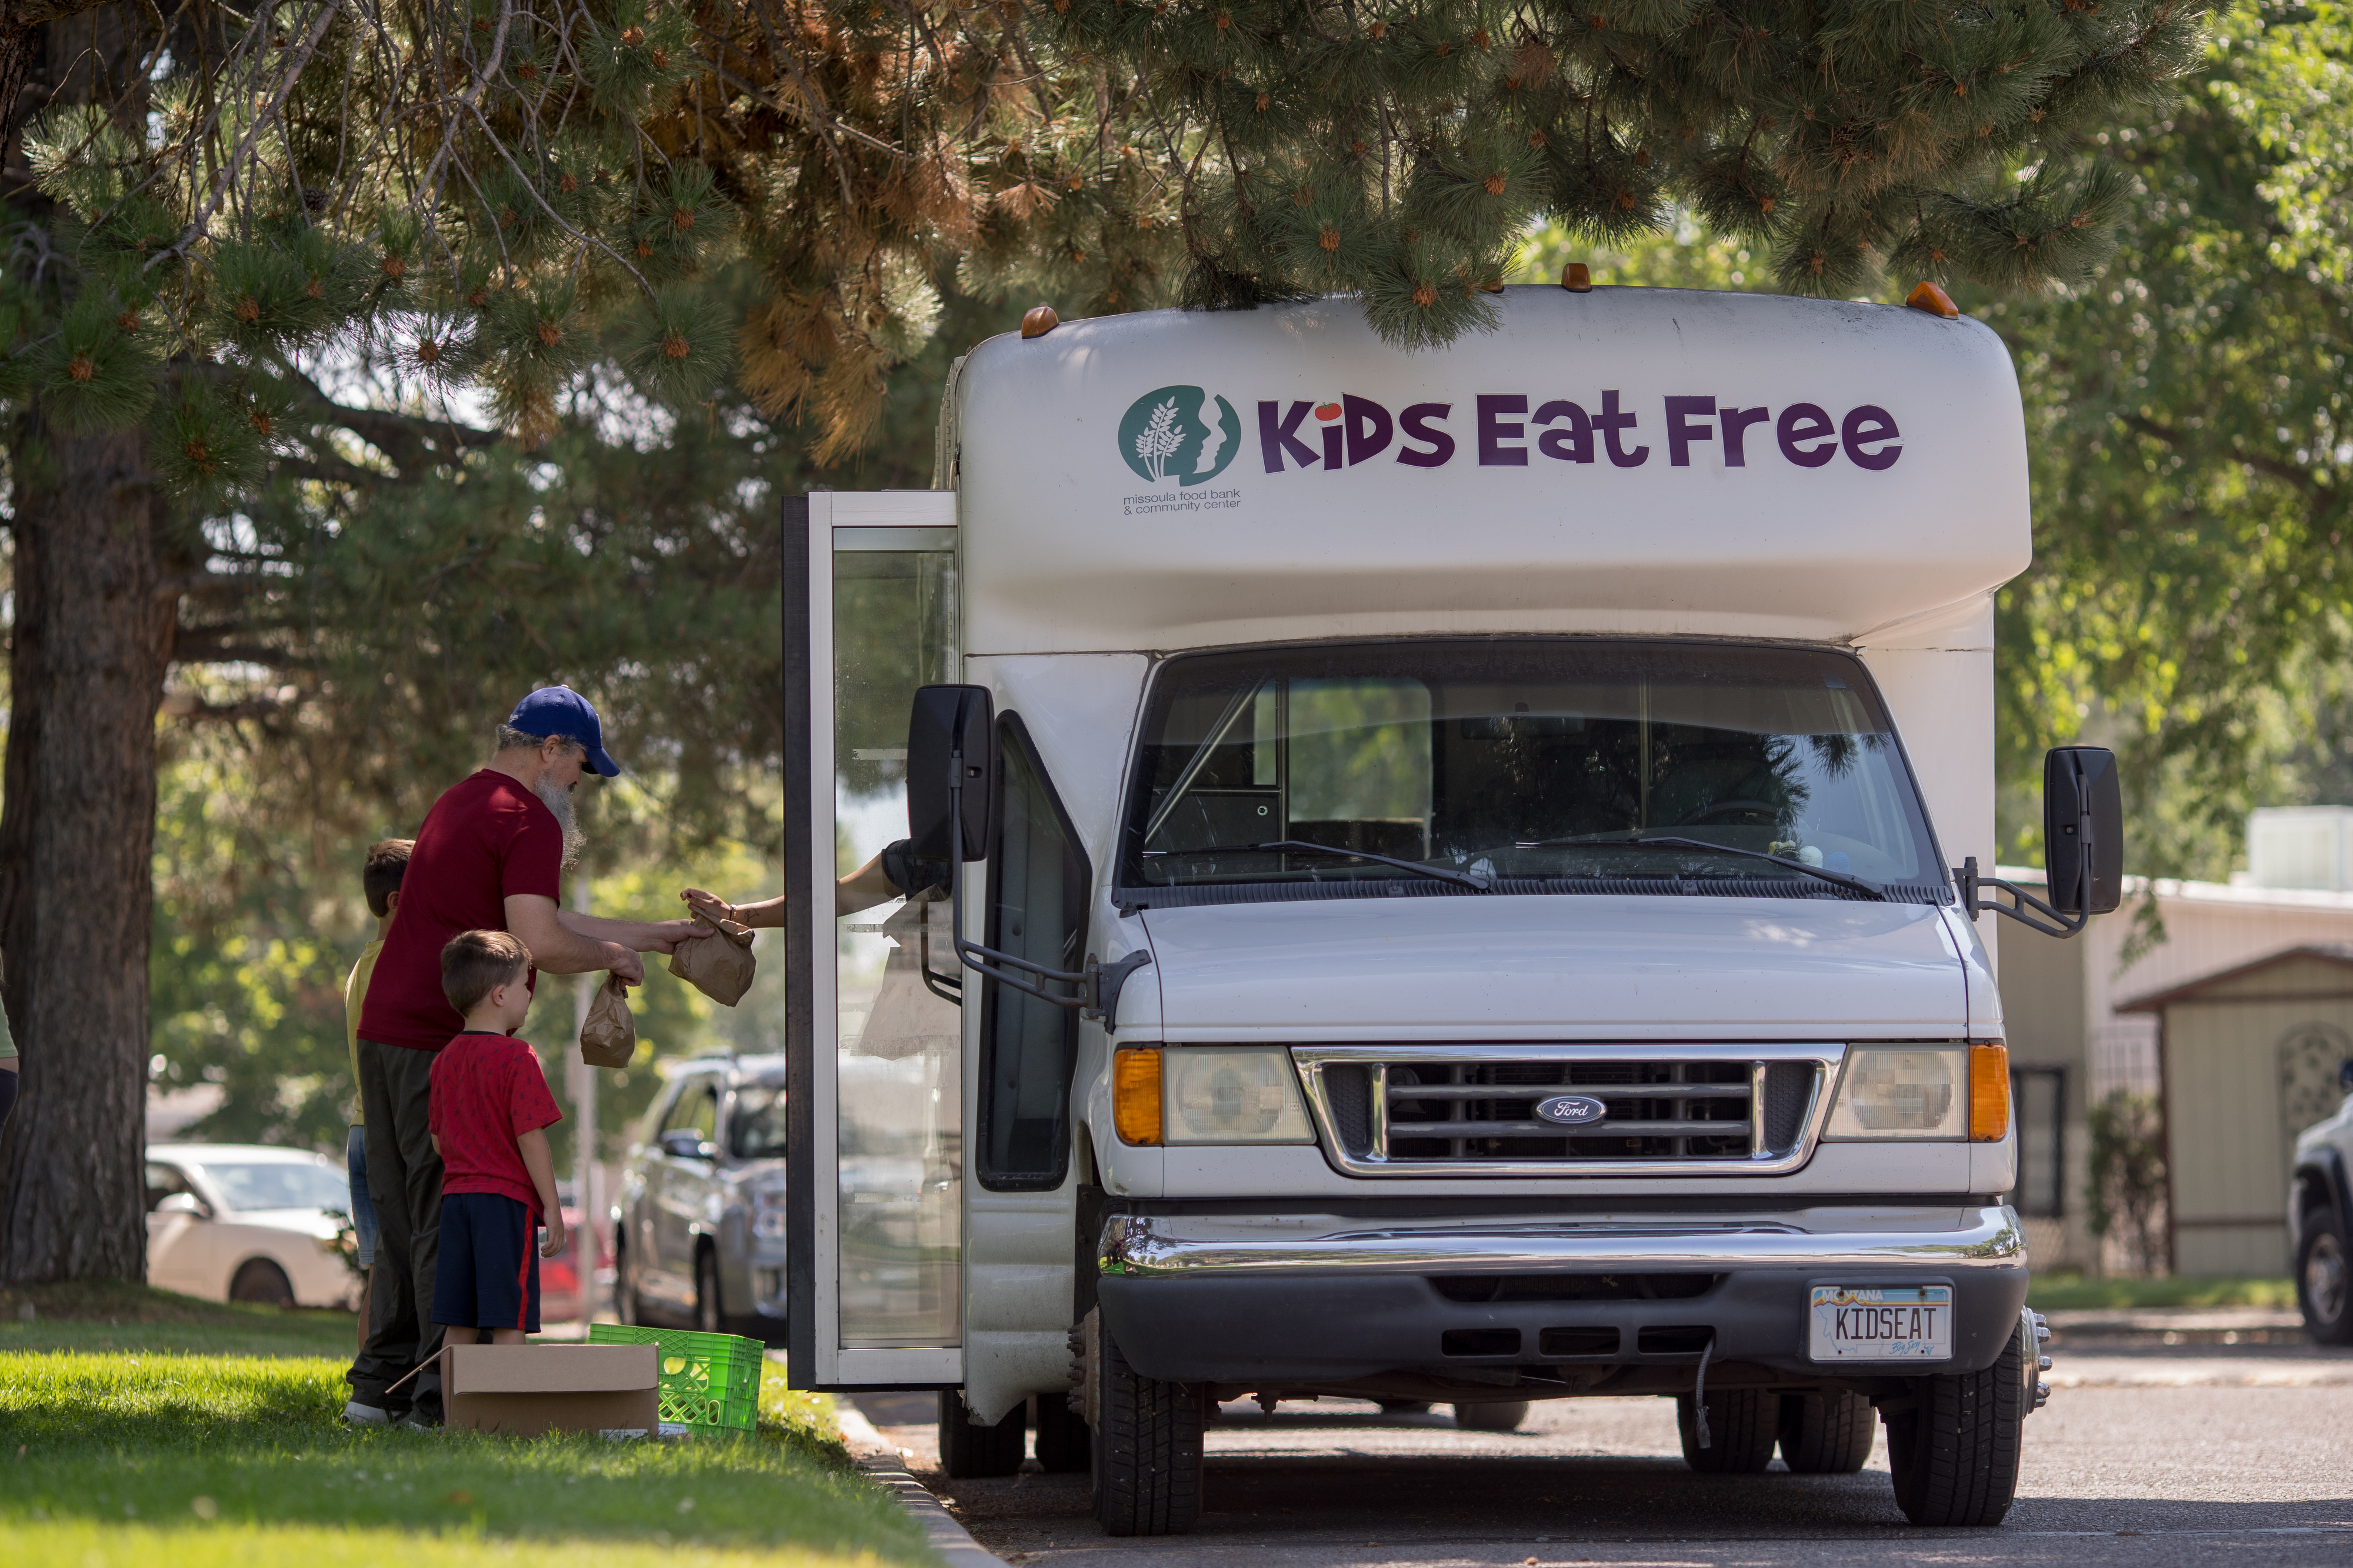 Kids line up at a park to get meals from a small white bus that says "Kids Eat Free" on the top. 